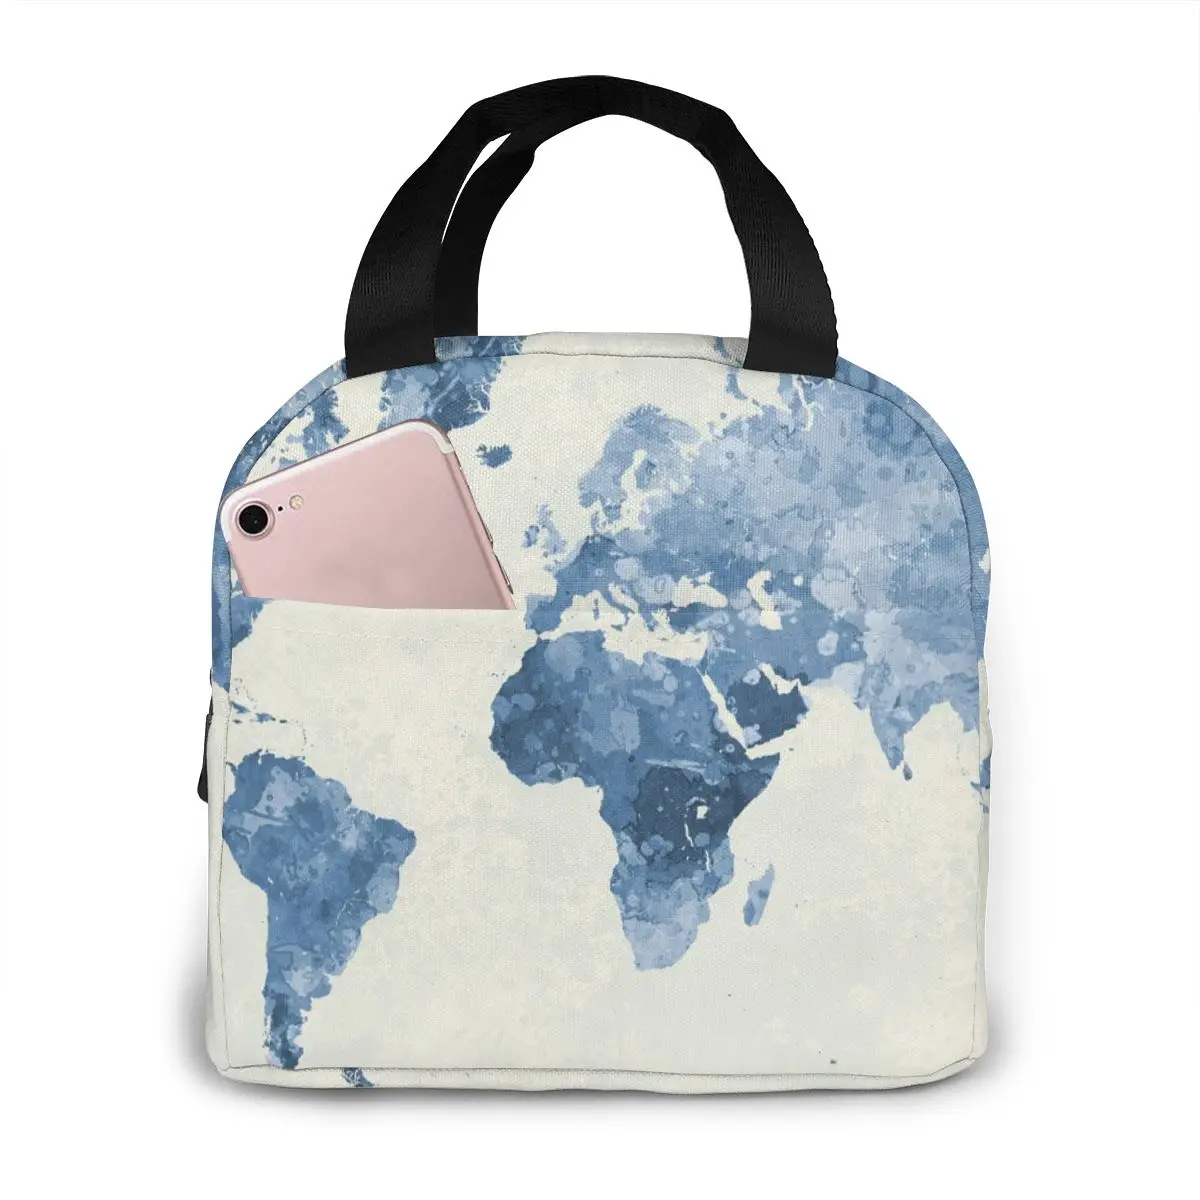 World Map Blue Lunch Food Box Bag Fashion Insulated Thermal Picnic for Women kids Men Cooler Tote | Багаж и сумки